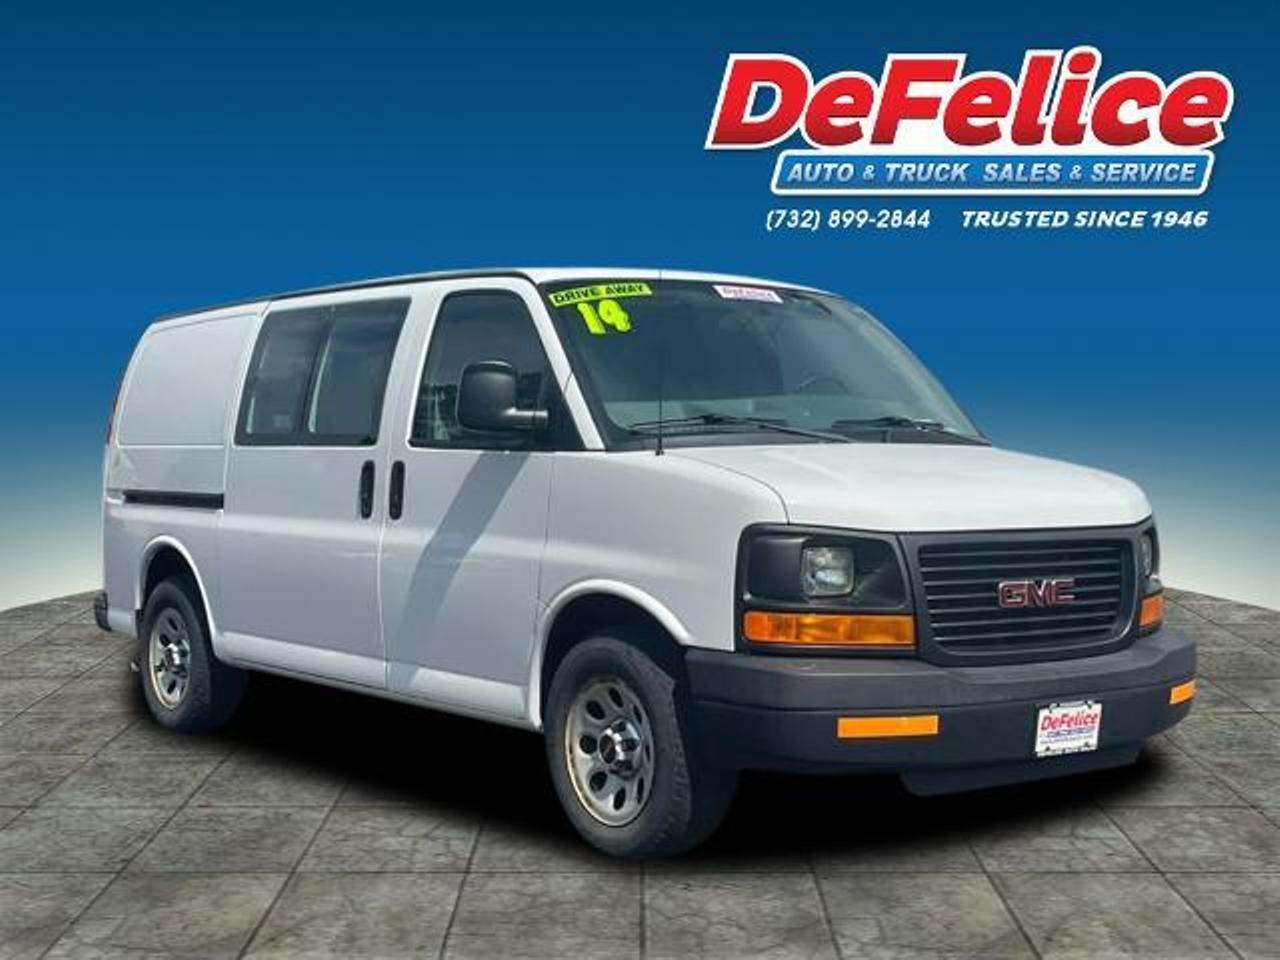 Used GMC Savana Cargo Van AWD for sale: buy All Wheel Drive Van with best  prices in the USA | CarBuzz